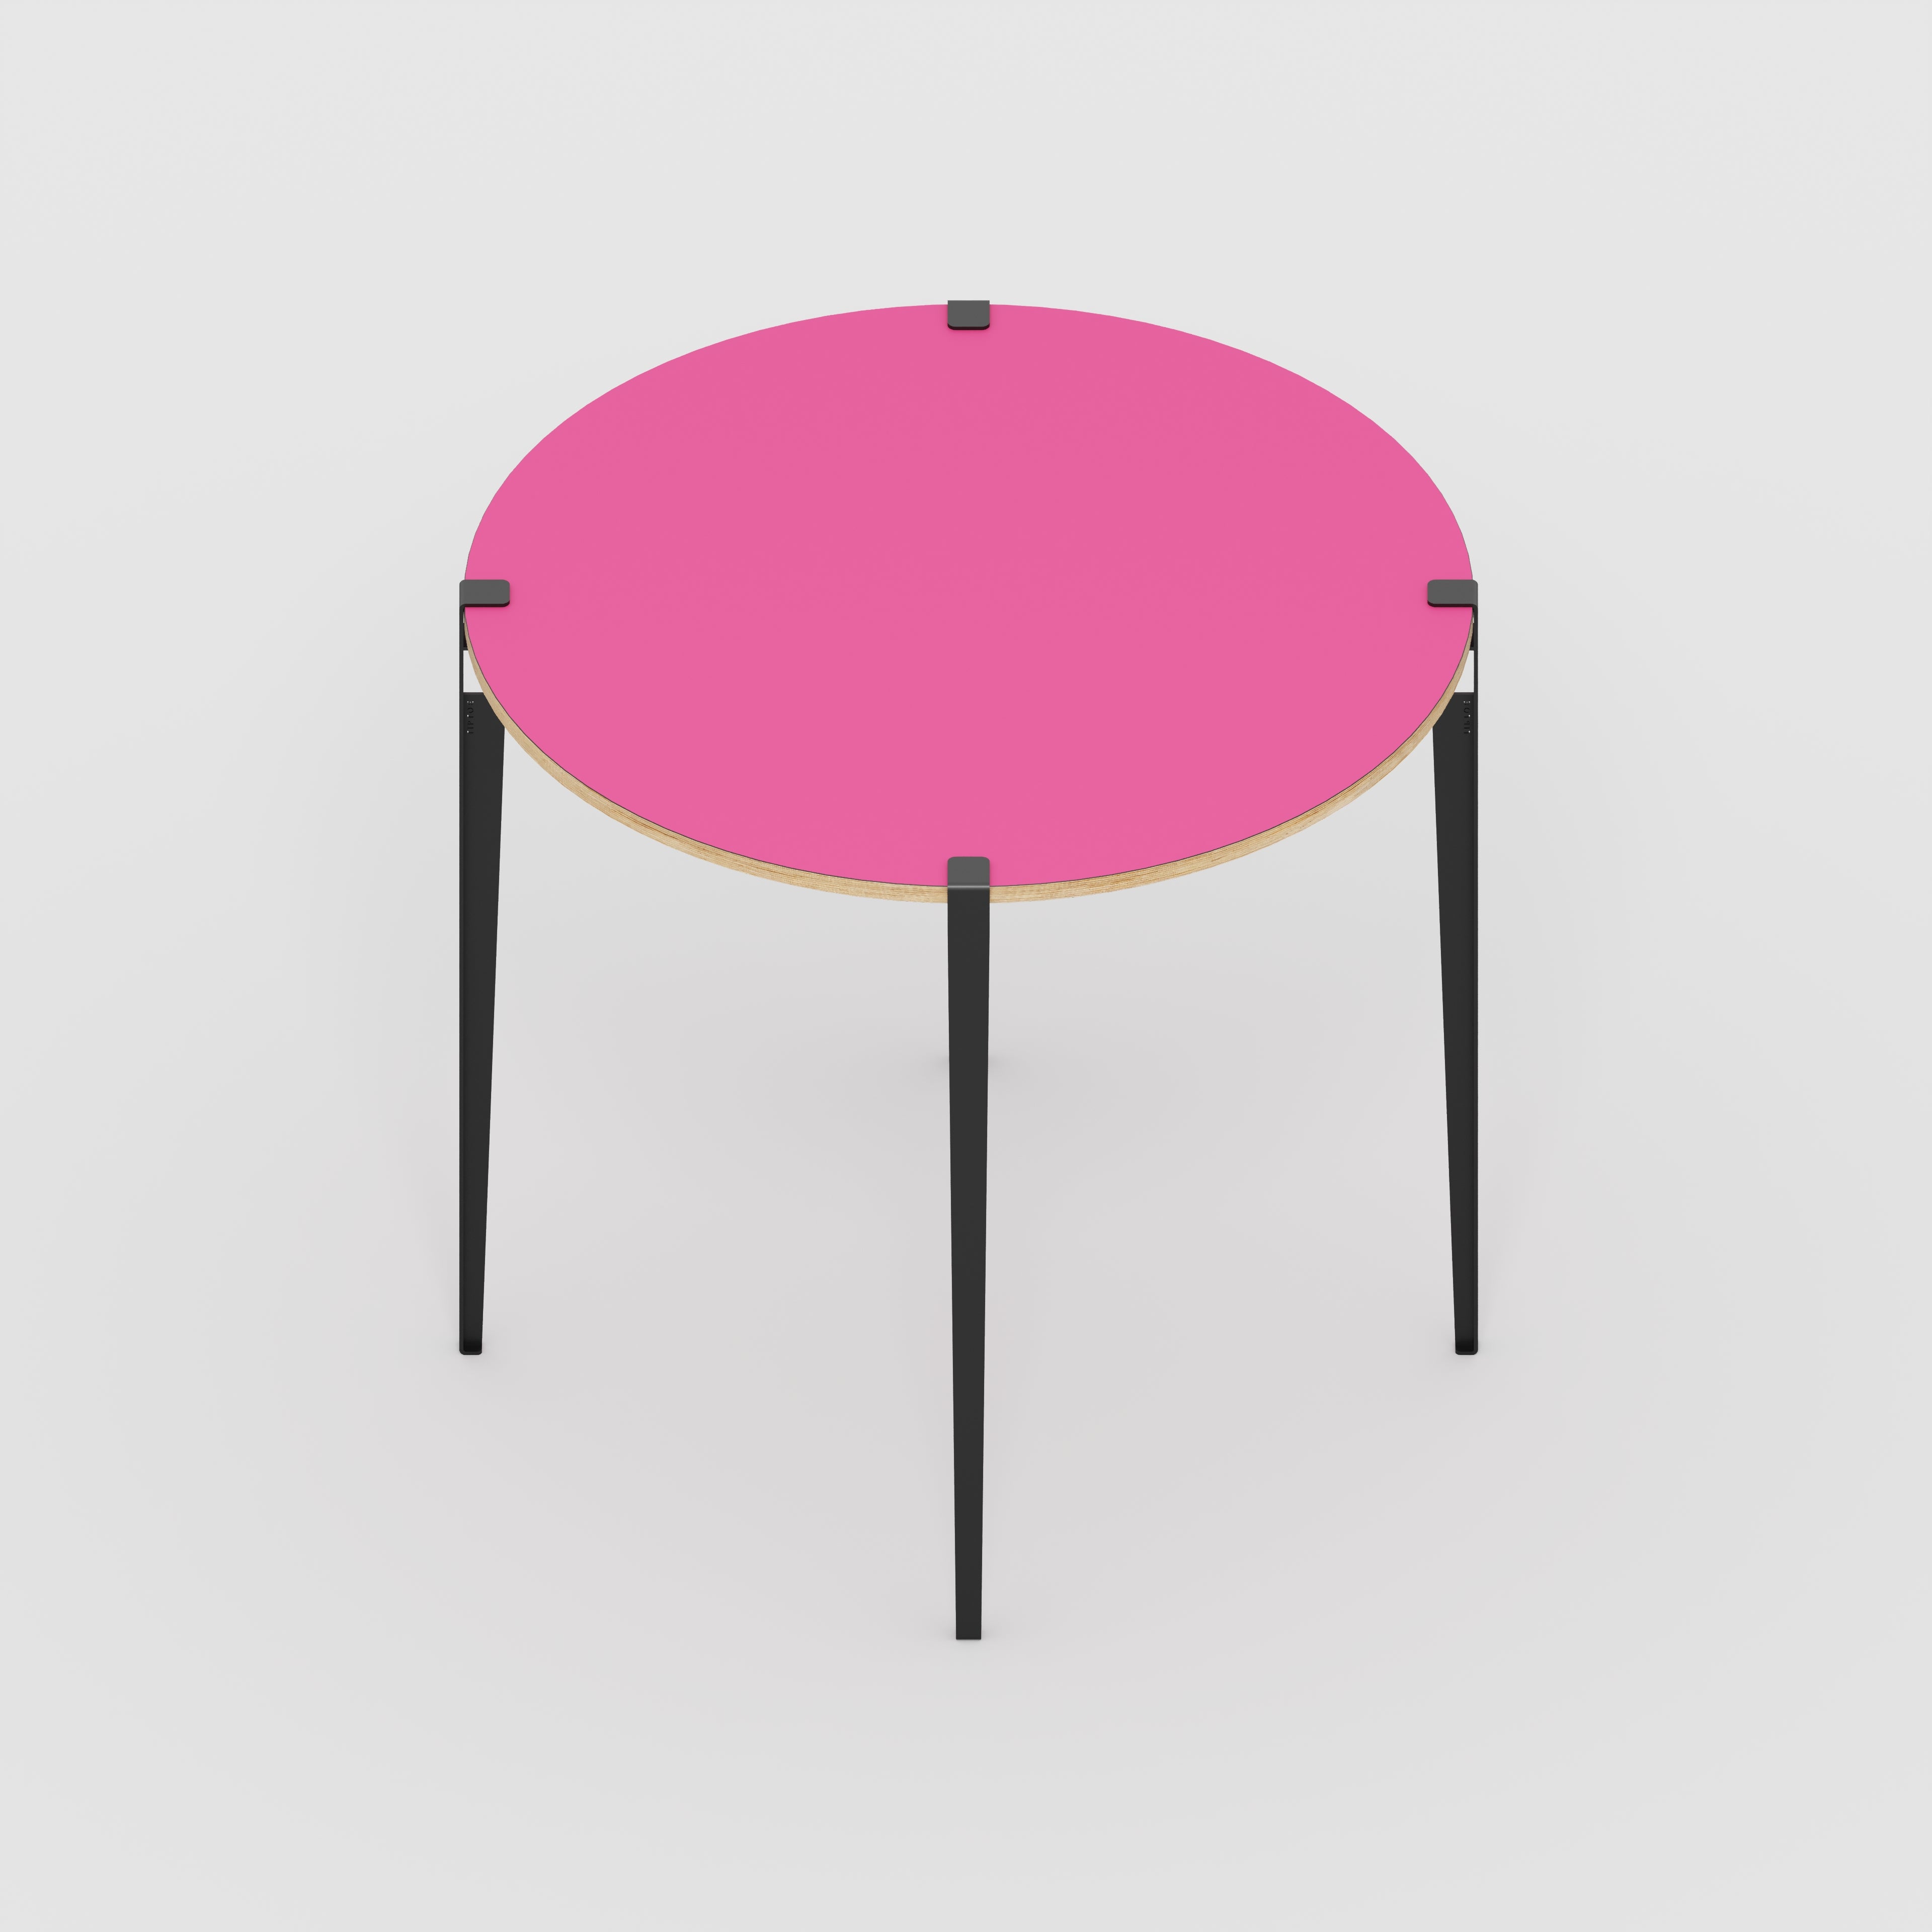 Round Table with Black Tiptoe Legs - Formica Juicy Pink - 1200(dia) x 1100(h)